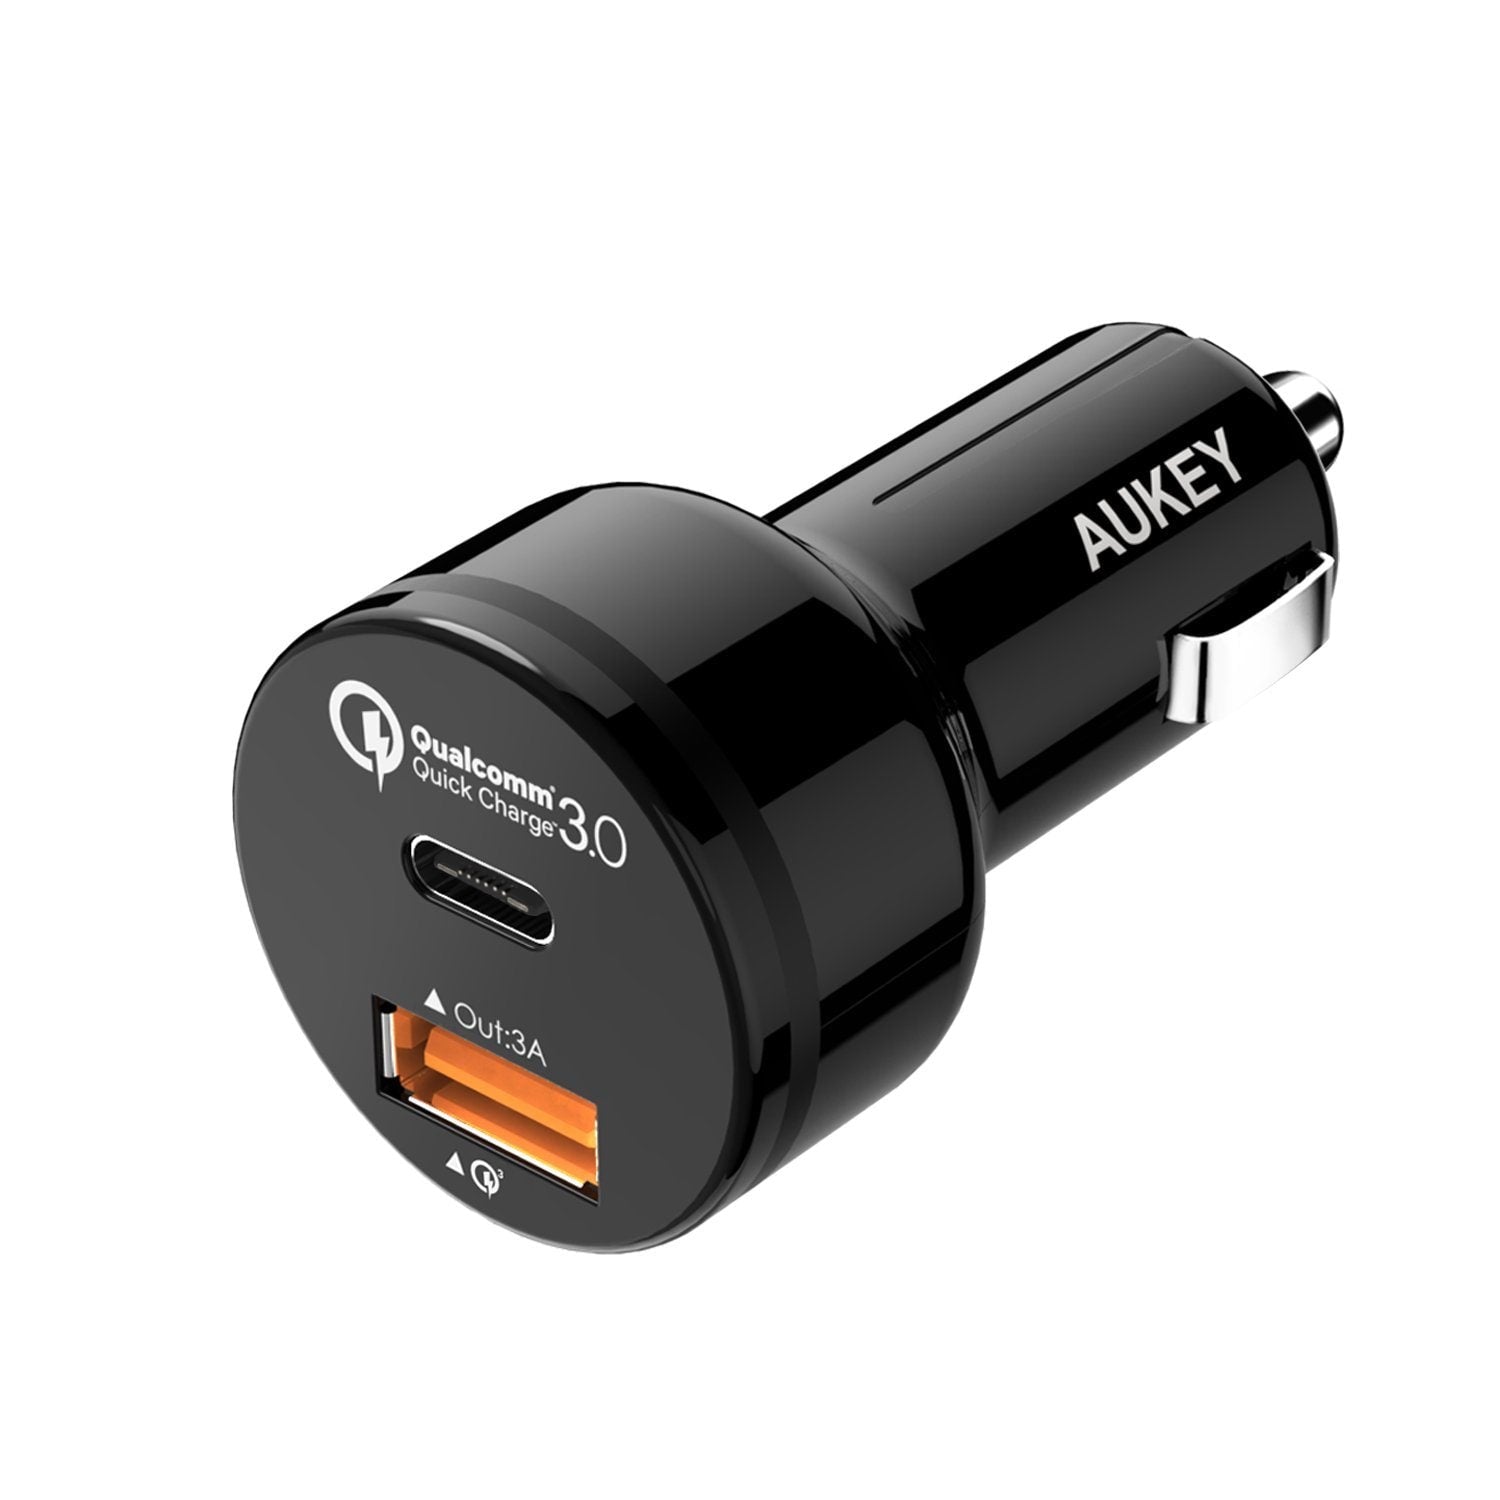 AUKEY CC-Y1 33W USB C & Qualcomm Quick Charge 3.0 Car Charger - Aukey Malaysia Official Store